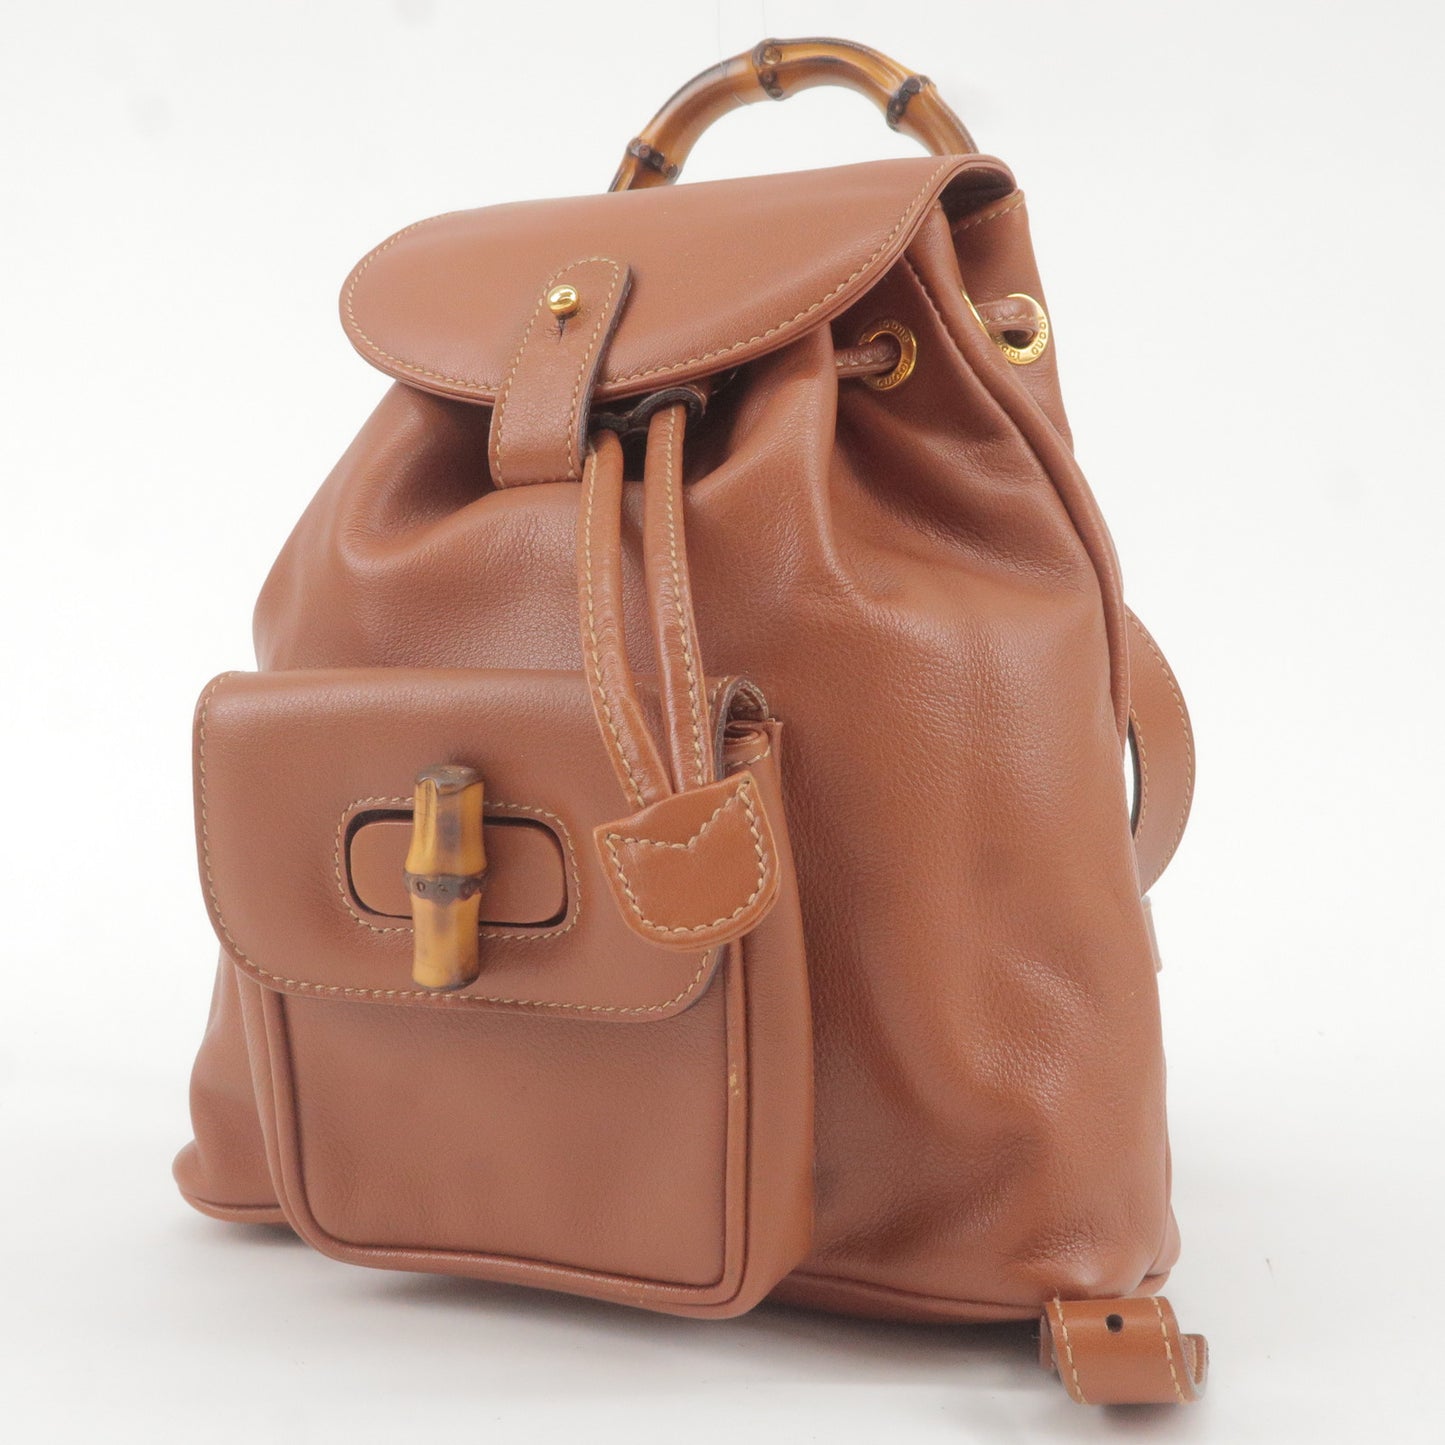 GUCCI Bamboo Leather Back Pack Ruck Sack Bag Brown 003.1705